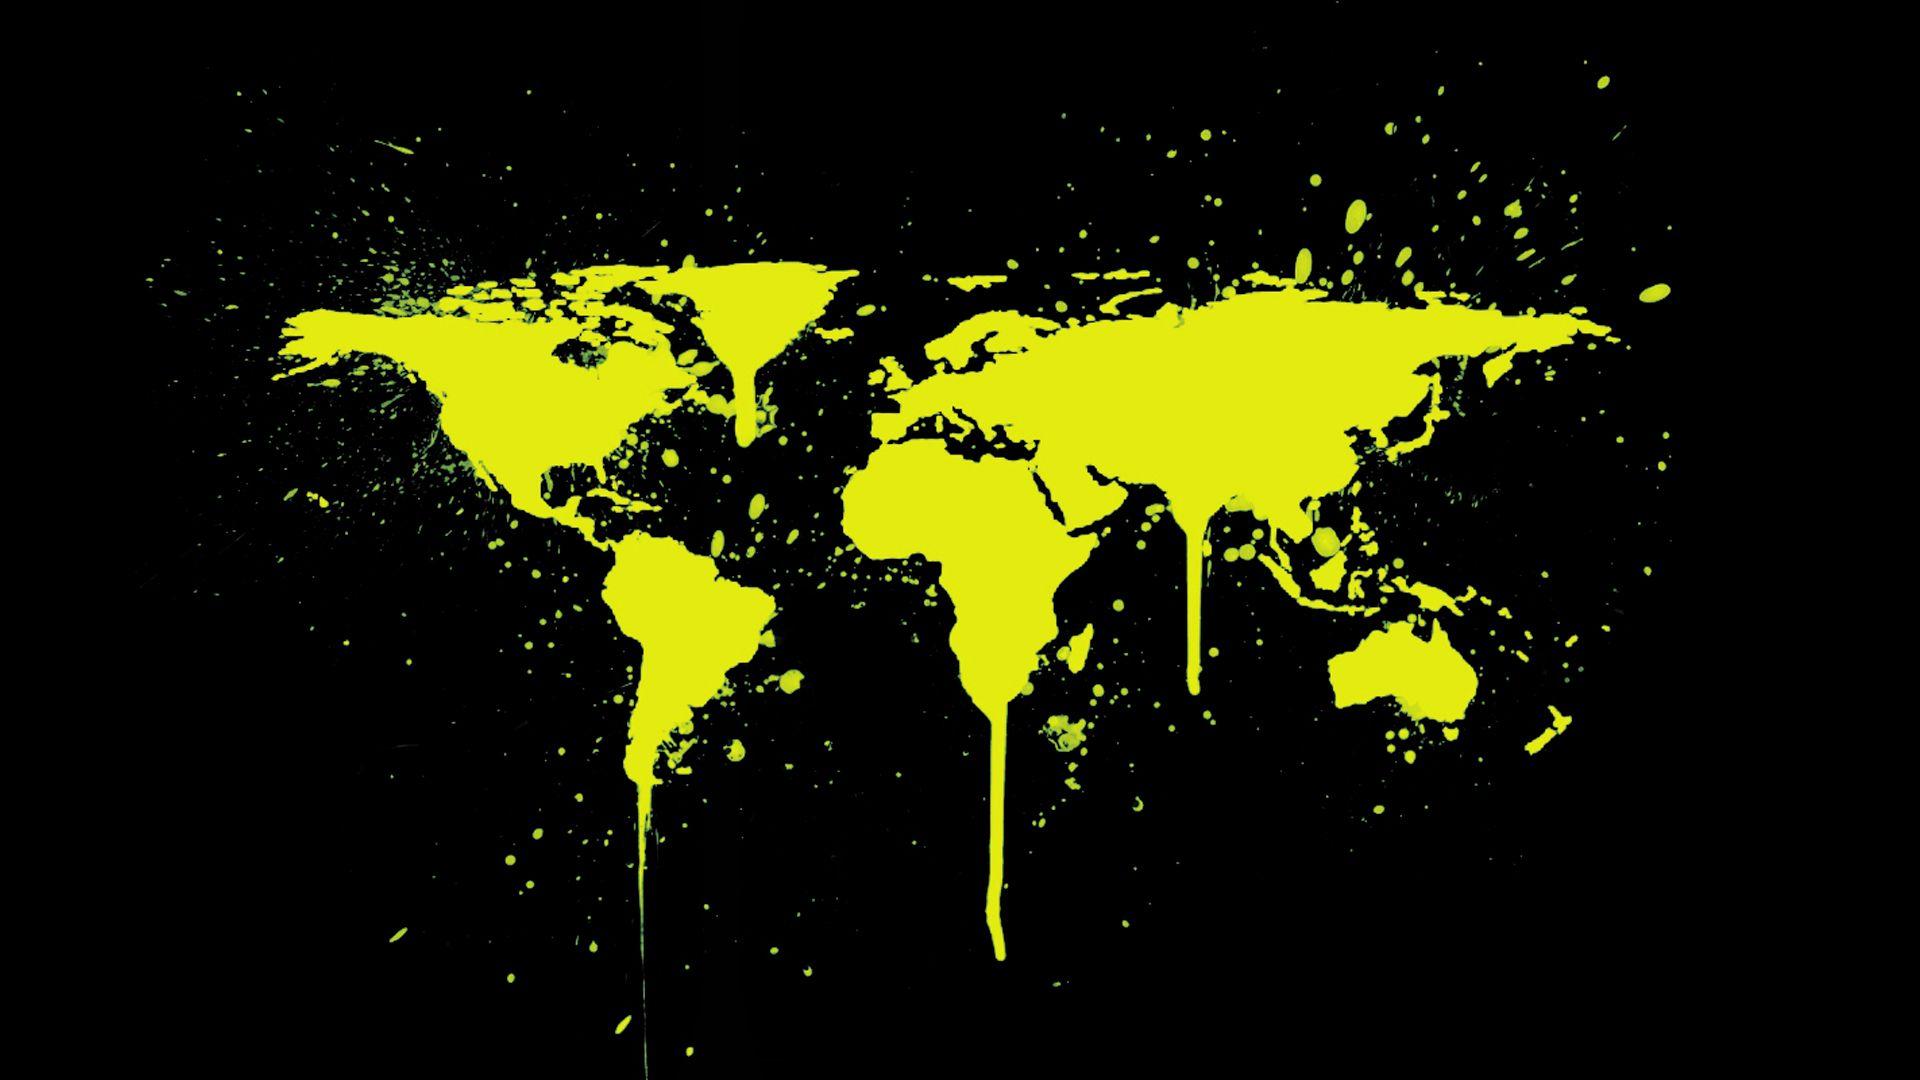 Earth, stencil, world map, spray paint, simple background